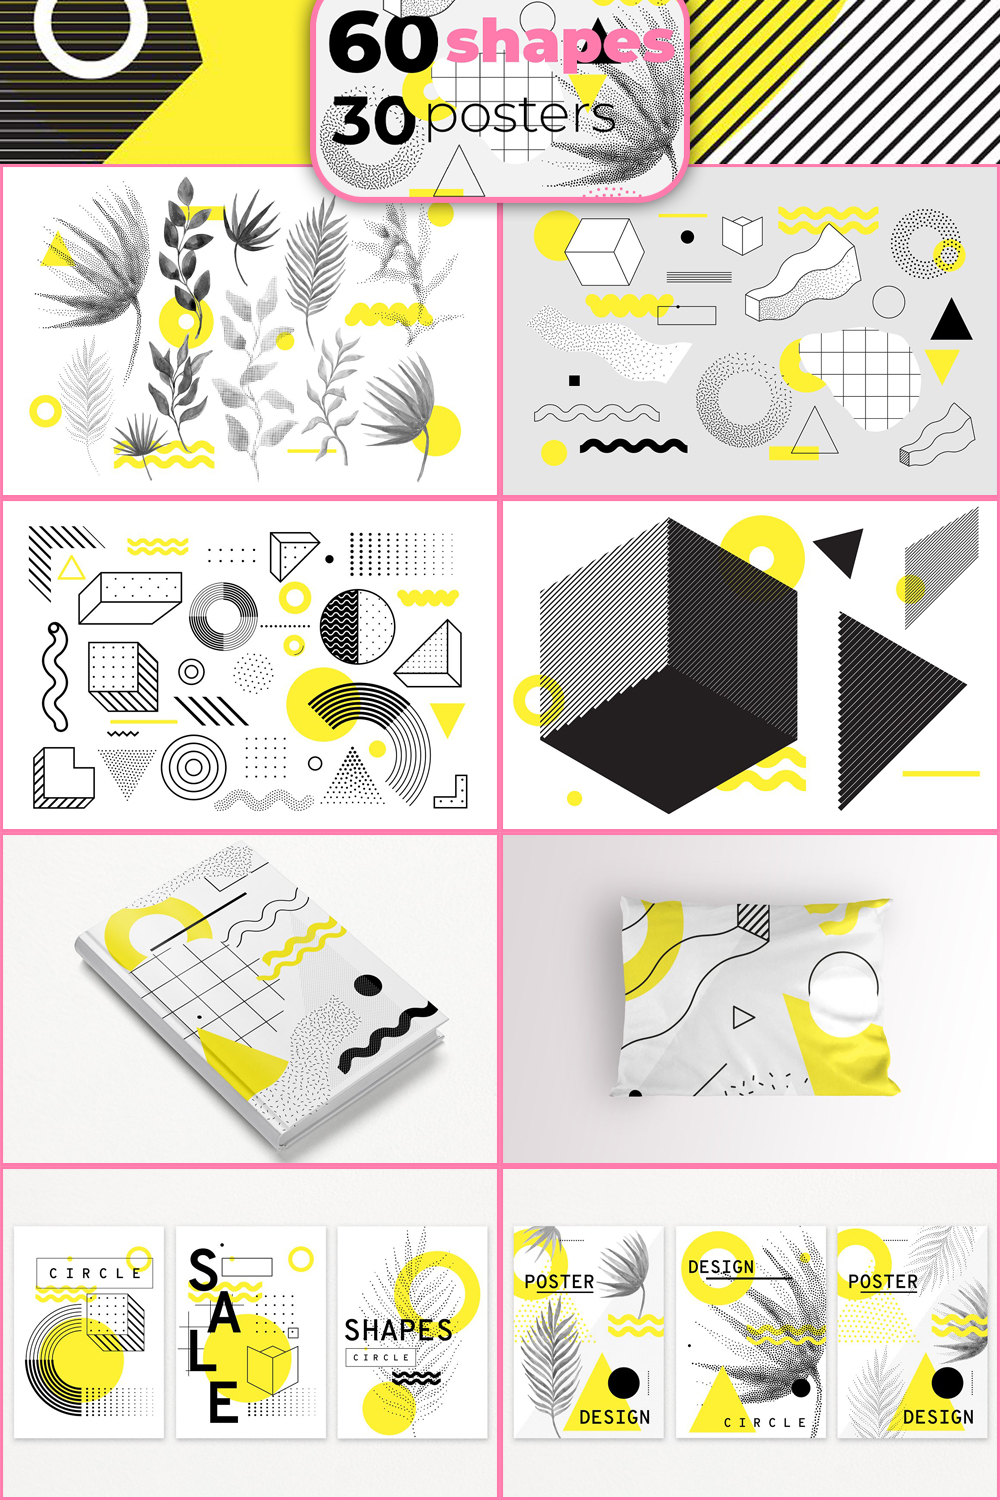 Geometric shapes 30 posters of pinterest.